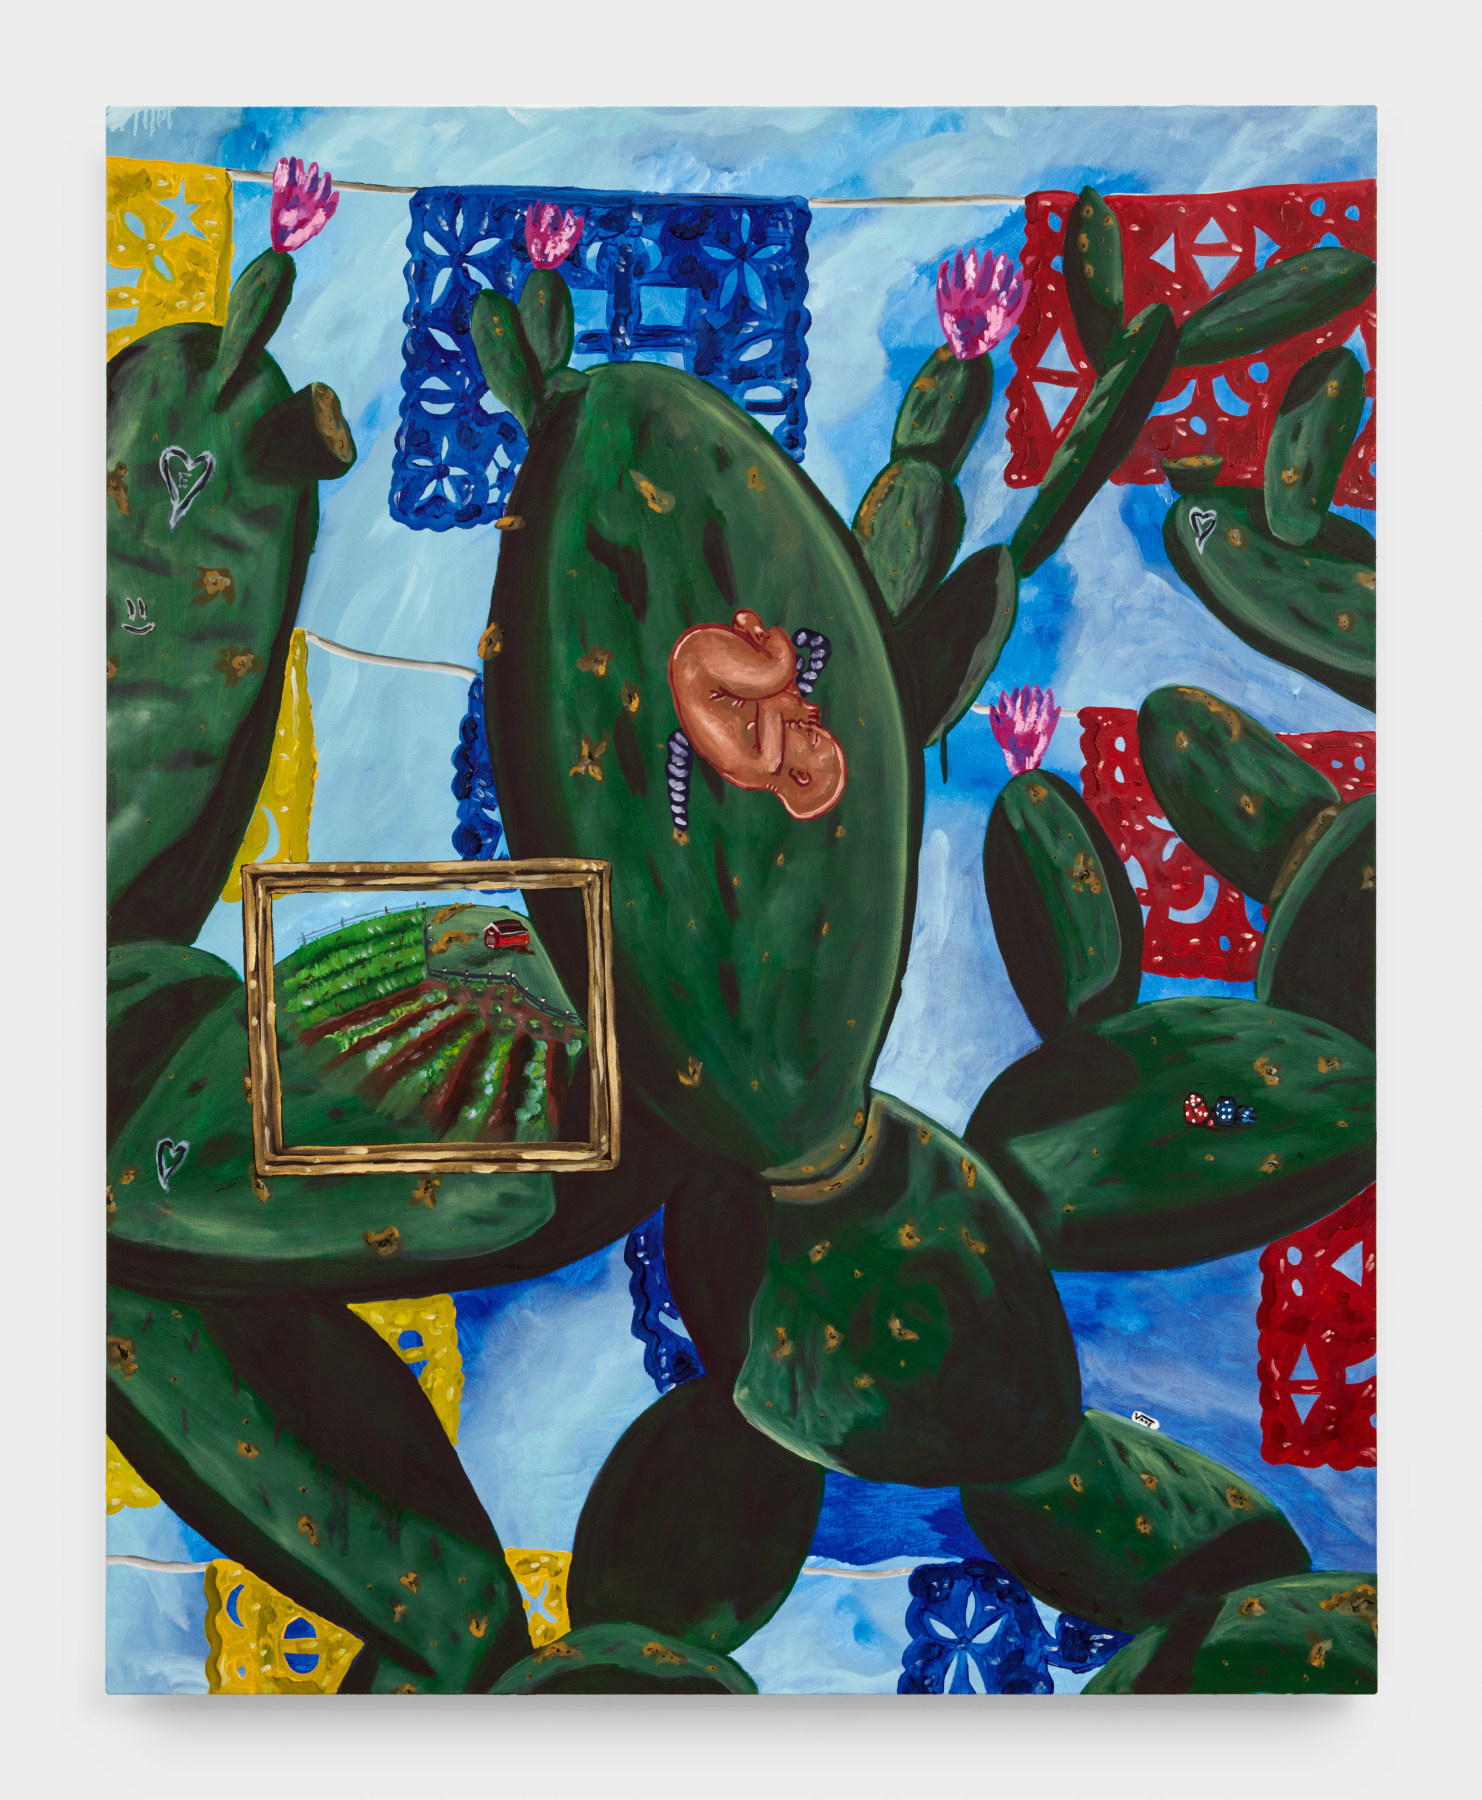 Marcel Alcalá's artwork "My Abuela's Cactus". A sprawling cactus against a blue sky holds a developing fetus, dice and a painting of farmland. 60 x 48 in (152.4 x 121.9 cm), oil on canvas, 2023